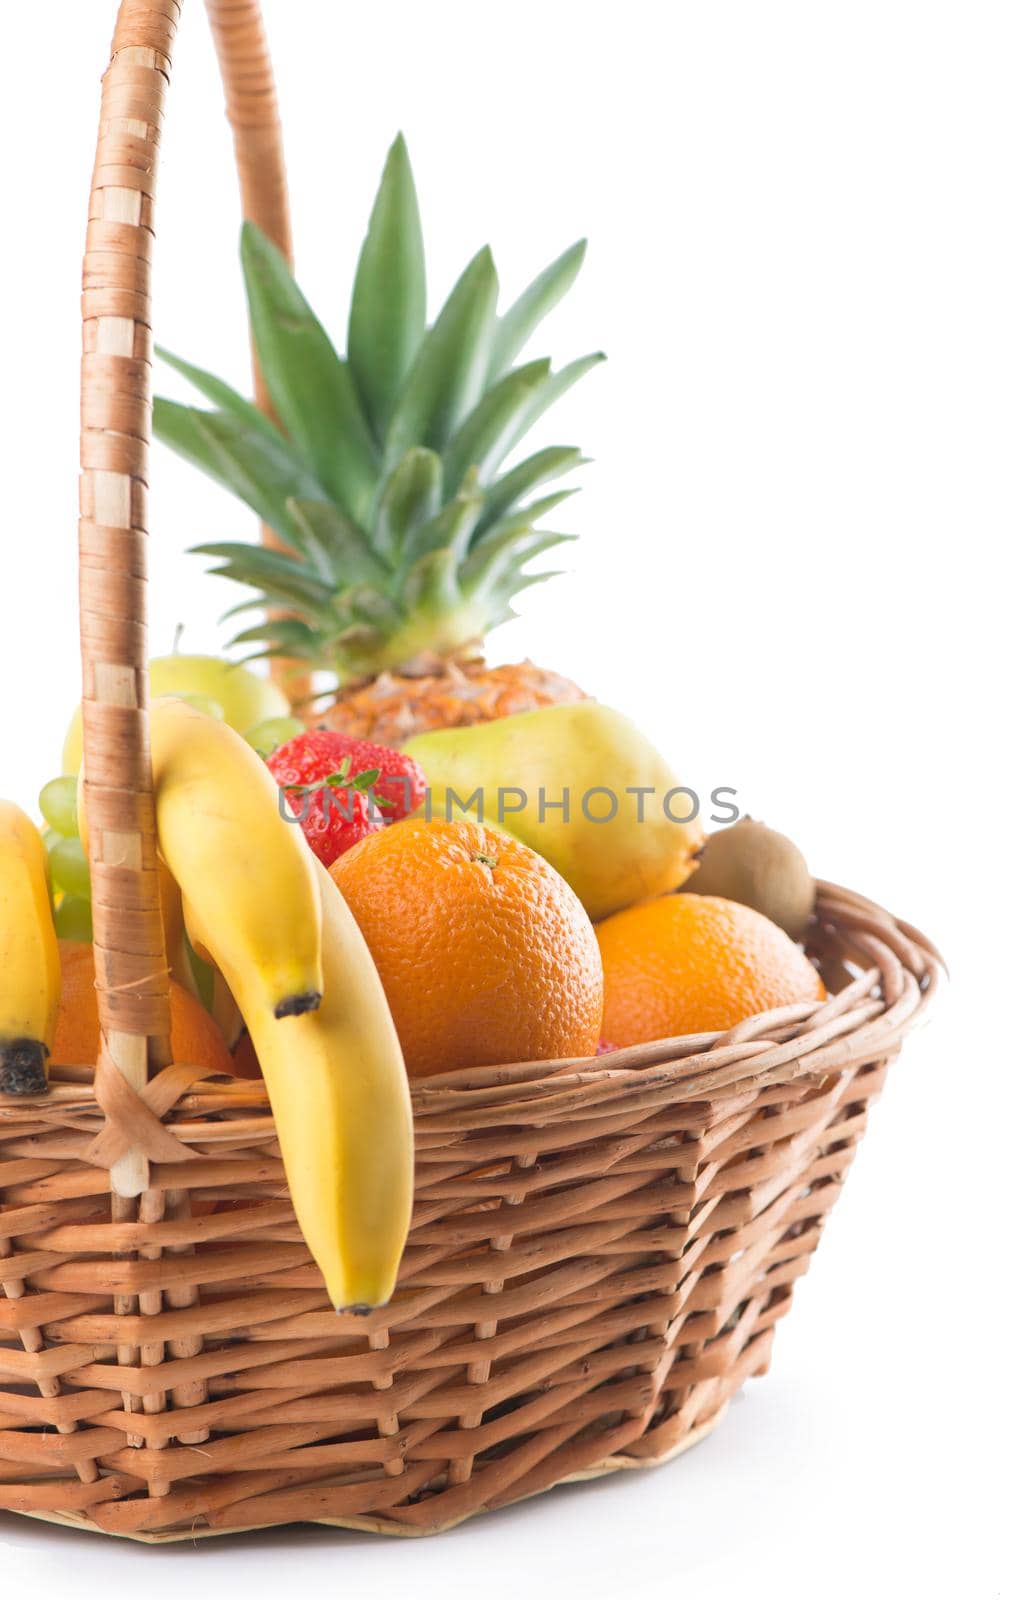 Fresh fruit in the basket against a white background